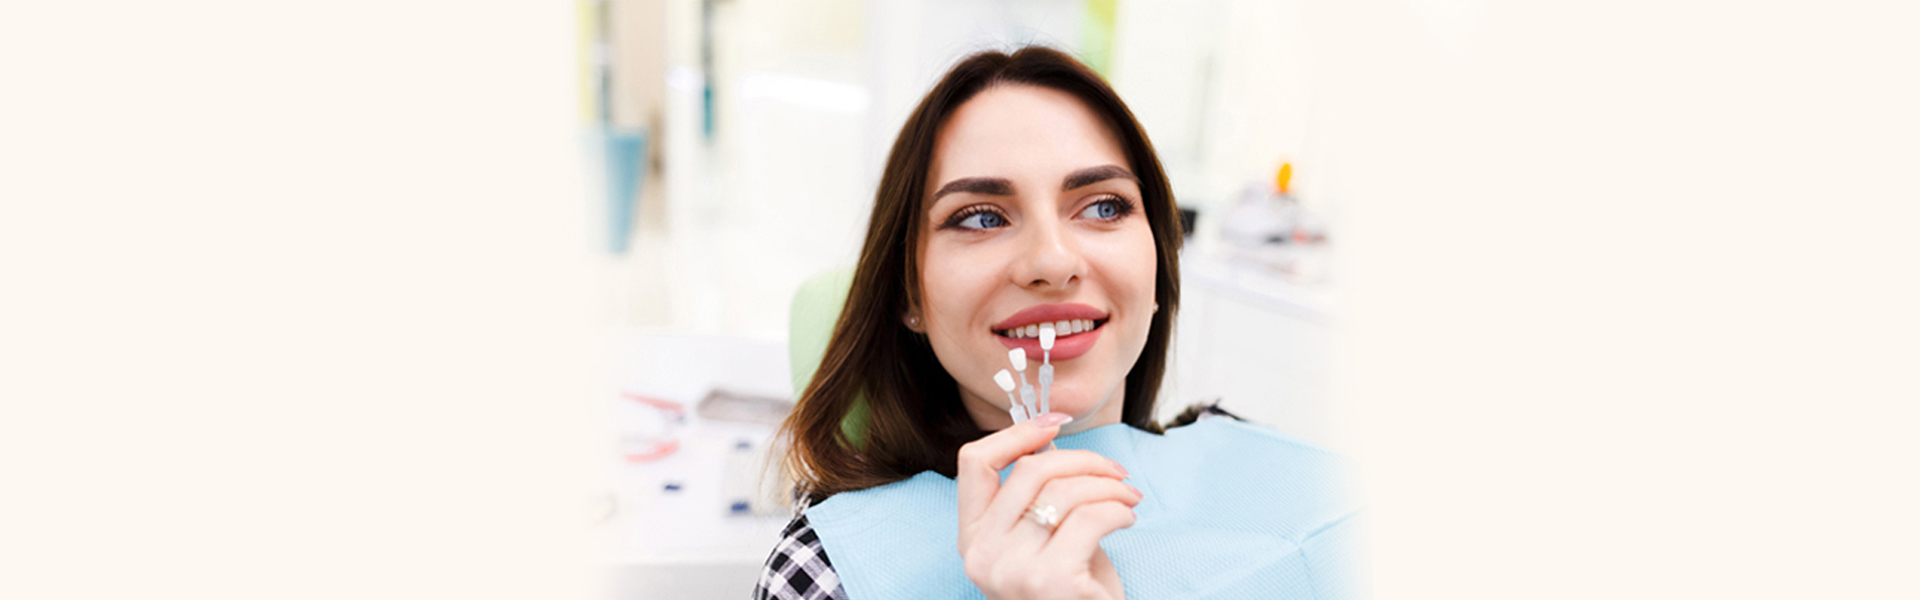 How to Choose Between Dental Crowns and Veneers for Your Smile Makeover